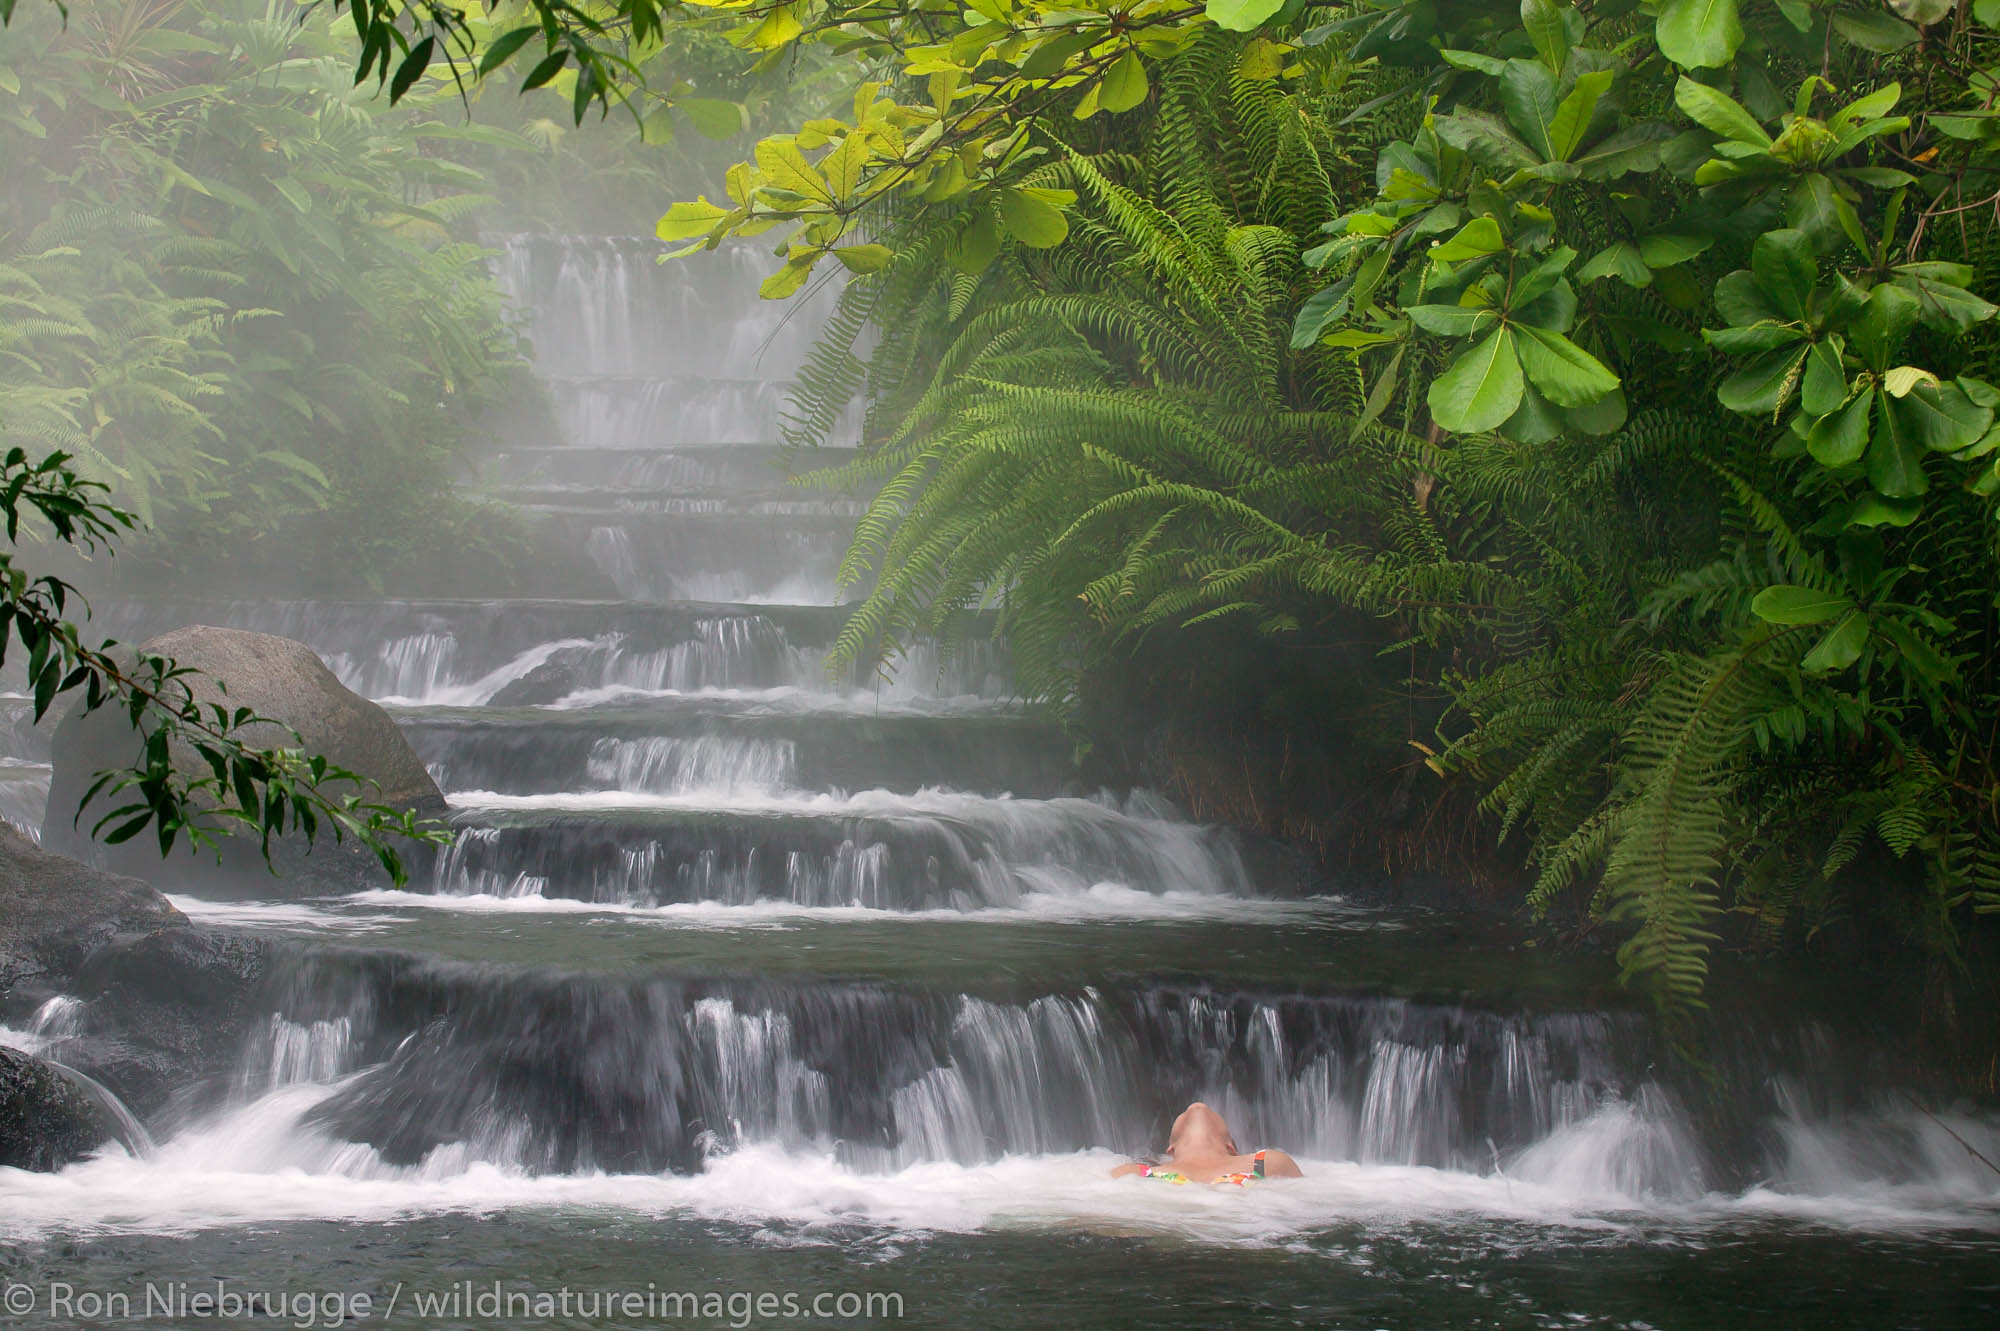 A visitor (mr) enjoys one of the warm streams that flows through Tabacon Hot Spring Resort and Spa, Costa Rica.